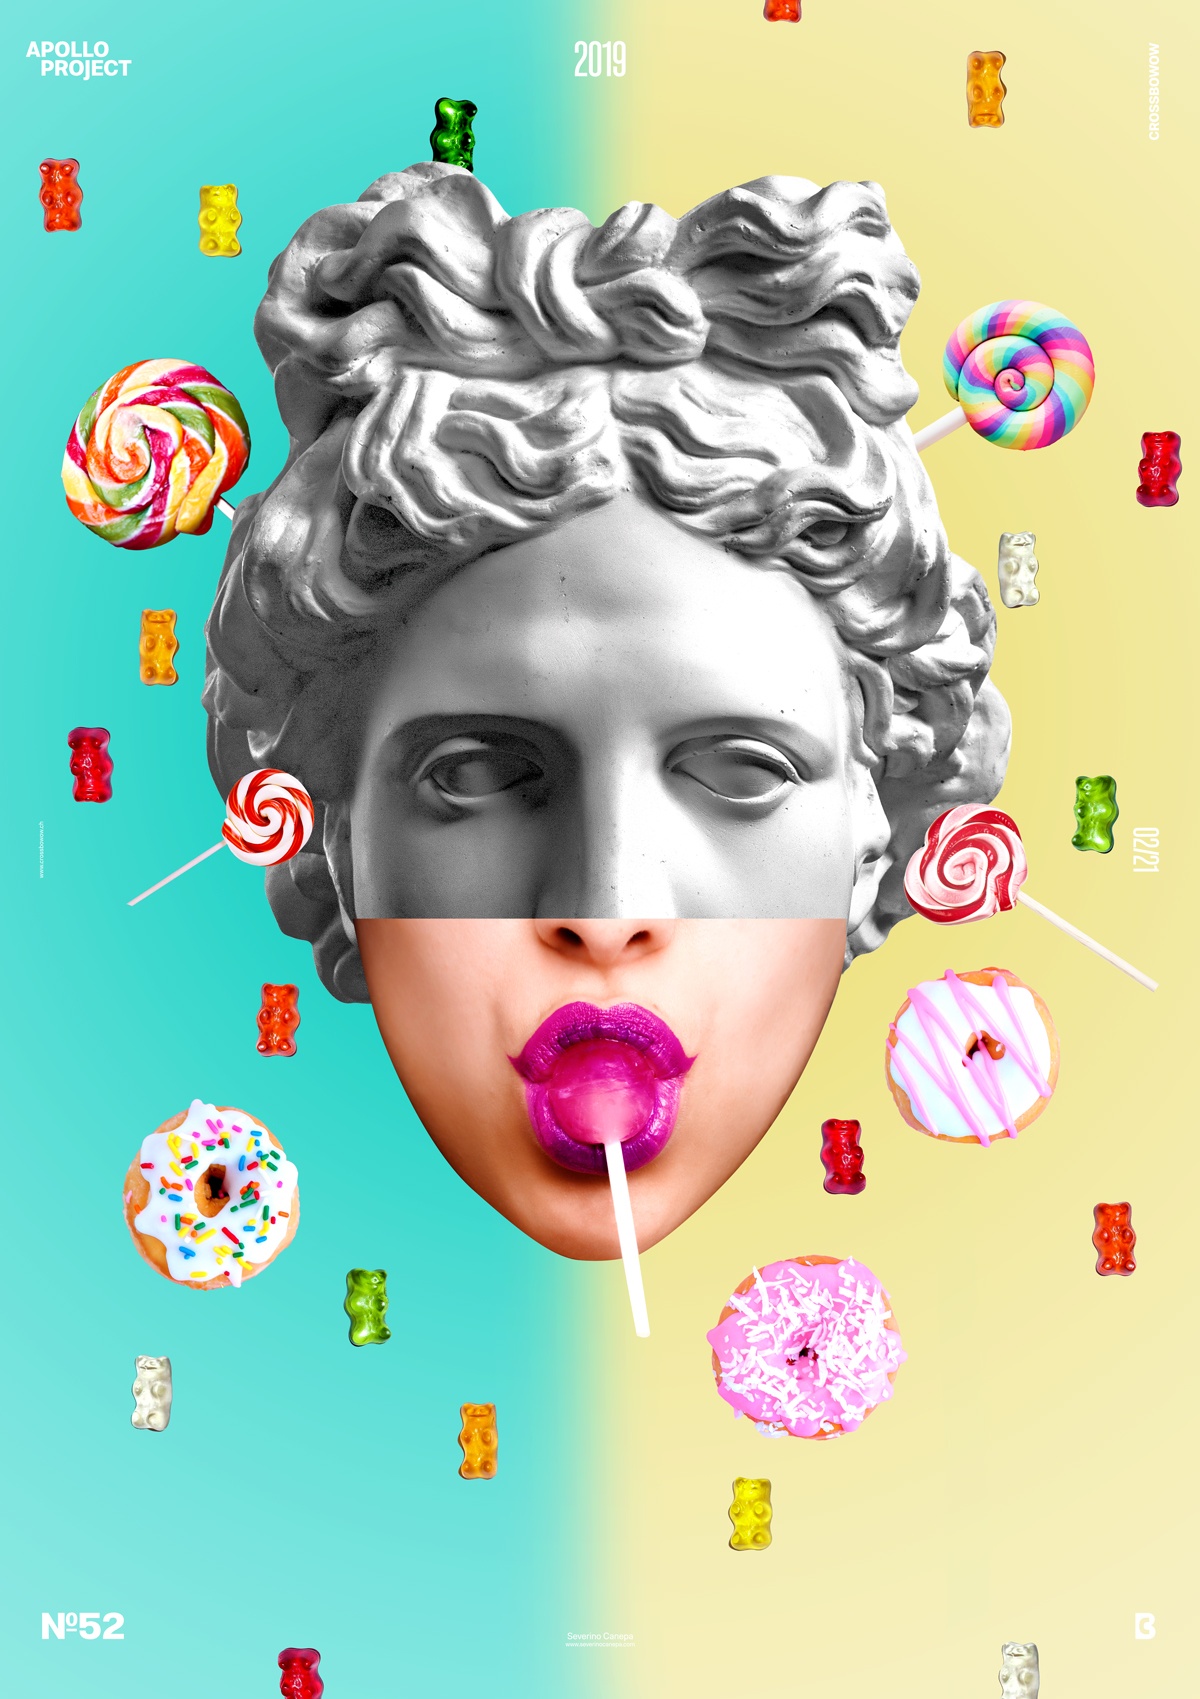 Visual of the creative poster #52 titled Lollipop